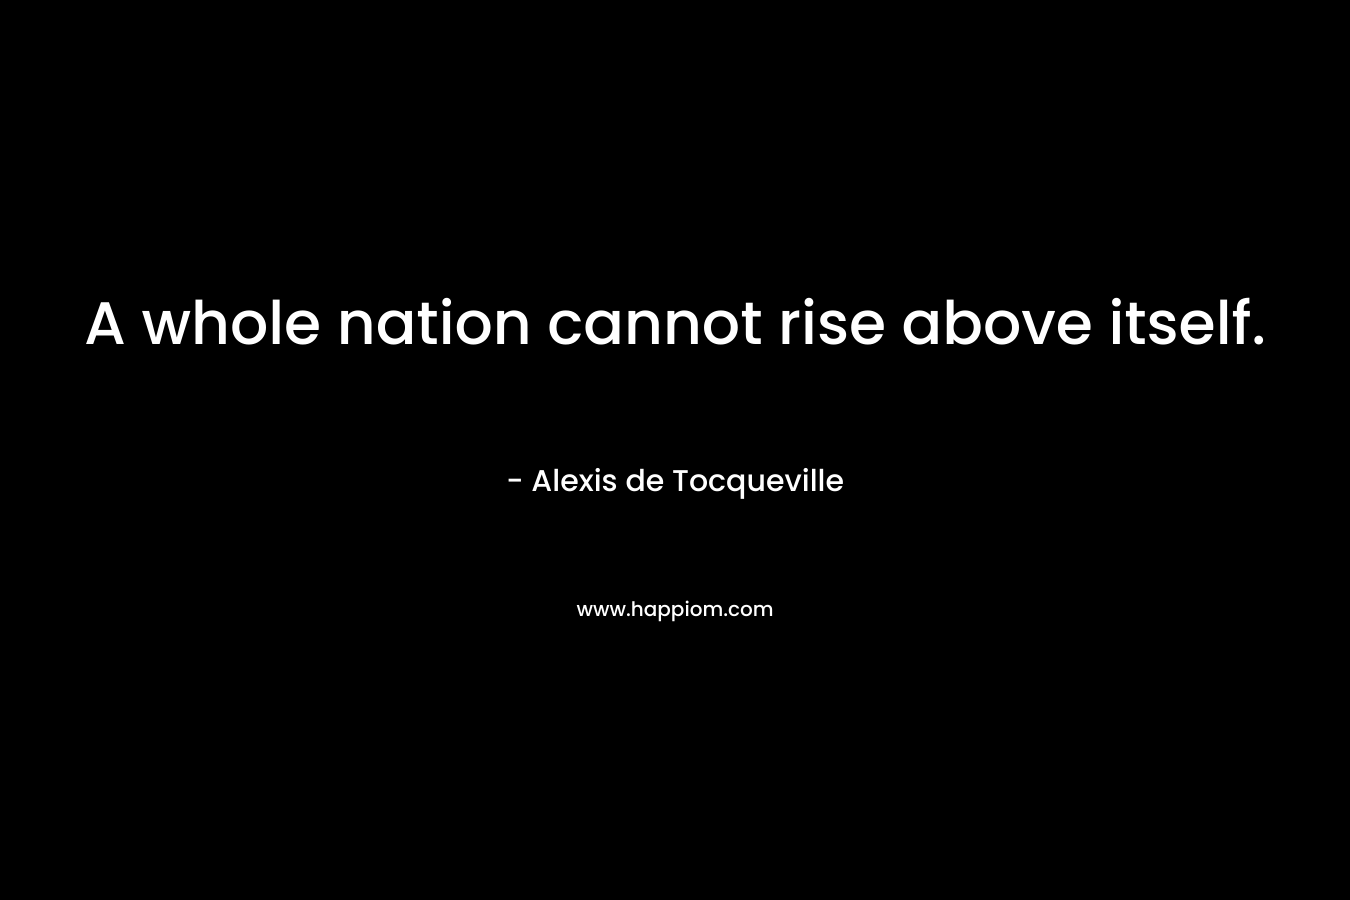 A whole nation cannot rise above itself.